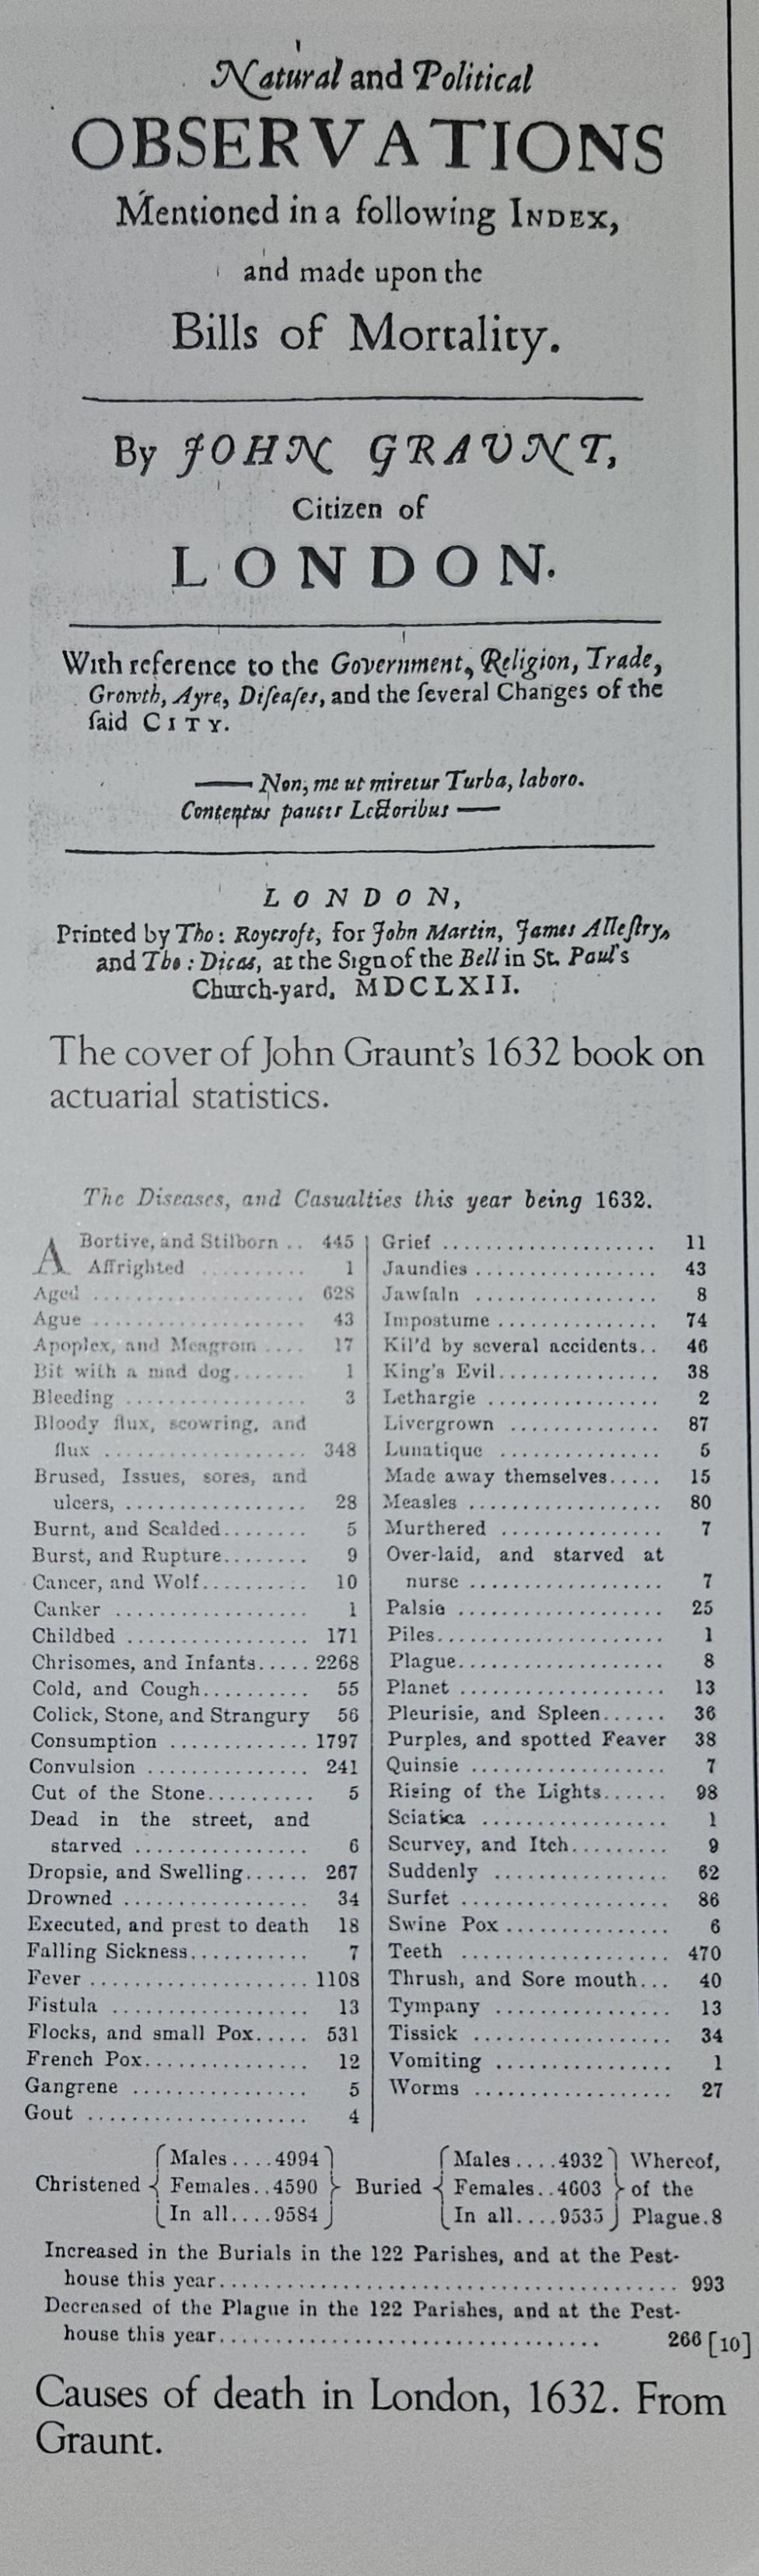 Summary of historical text showing &#x27;Bills of Mortality&#x27; for London, 1632, categorizing various causes of death for that year